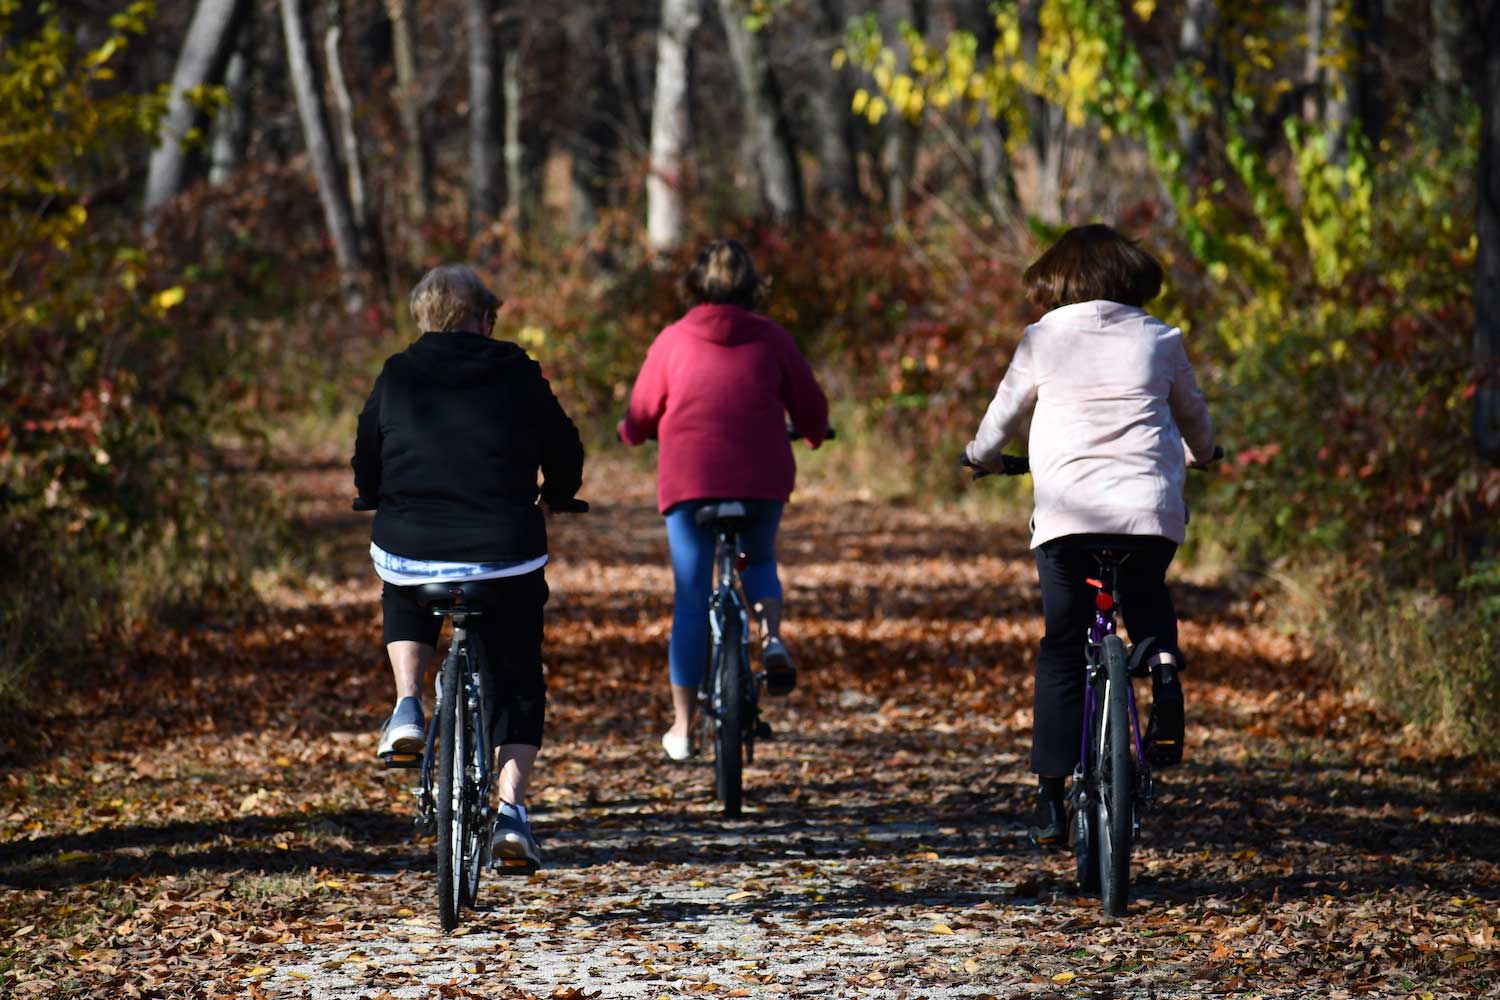 Three people riding bikes along a leaf-covered trail.